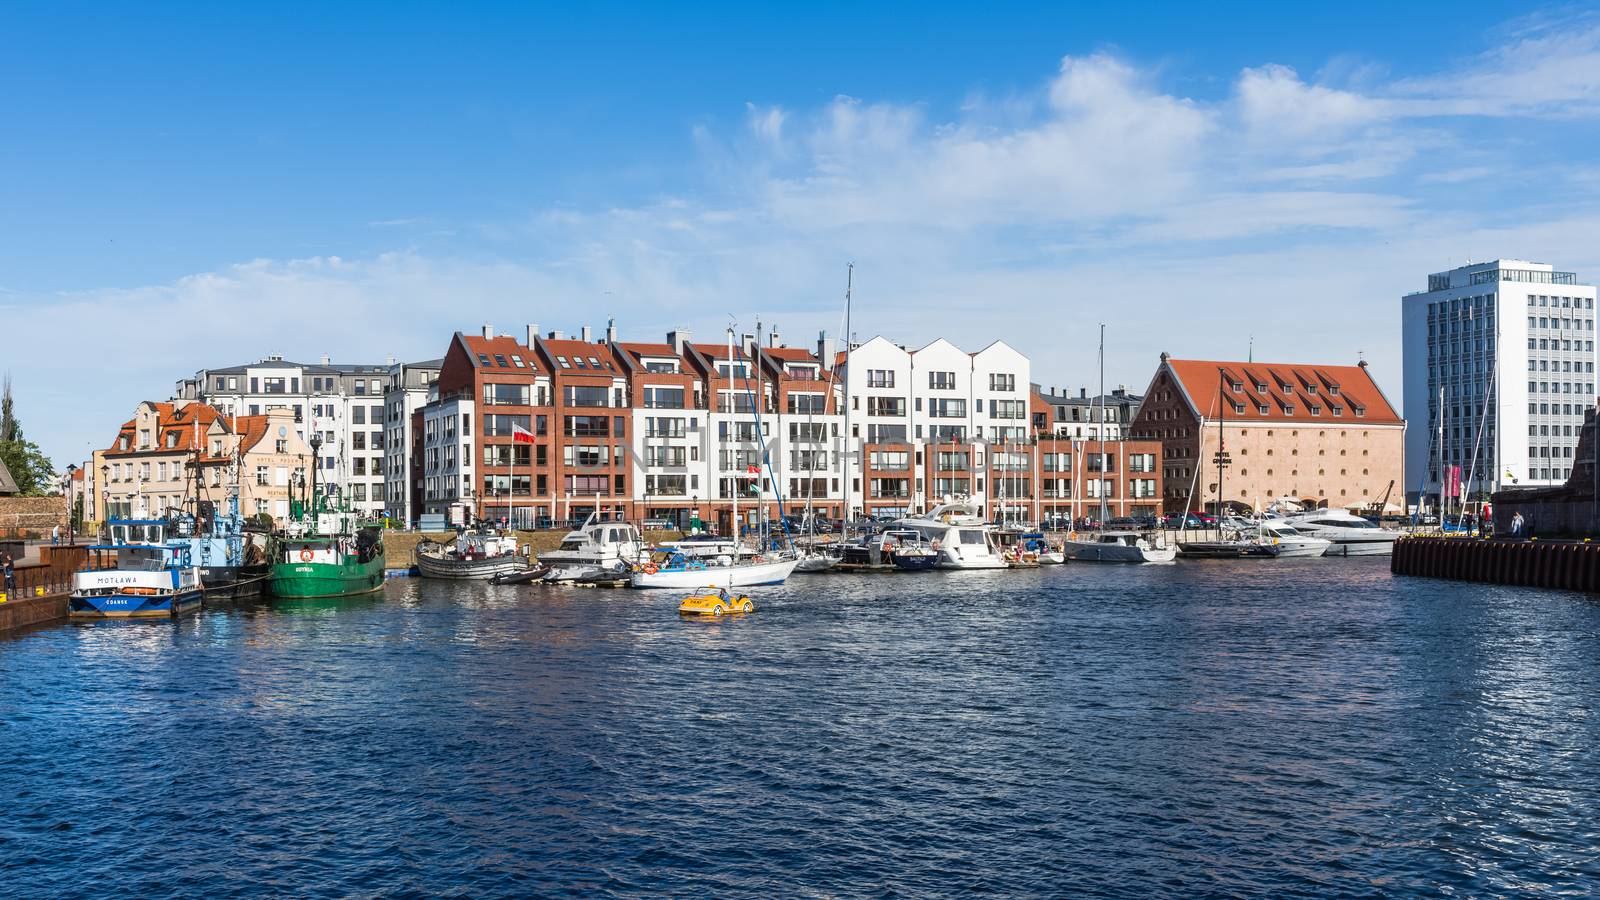 Harbor on the Motlawa river in Gdansk, the historical capital of Gdansk Pomerania and the largest city of Kashubia region with a population near 460,000.